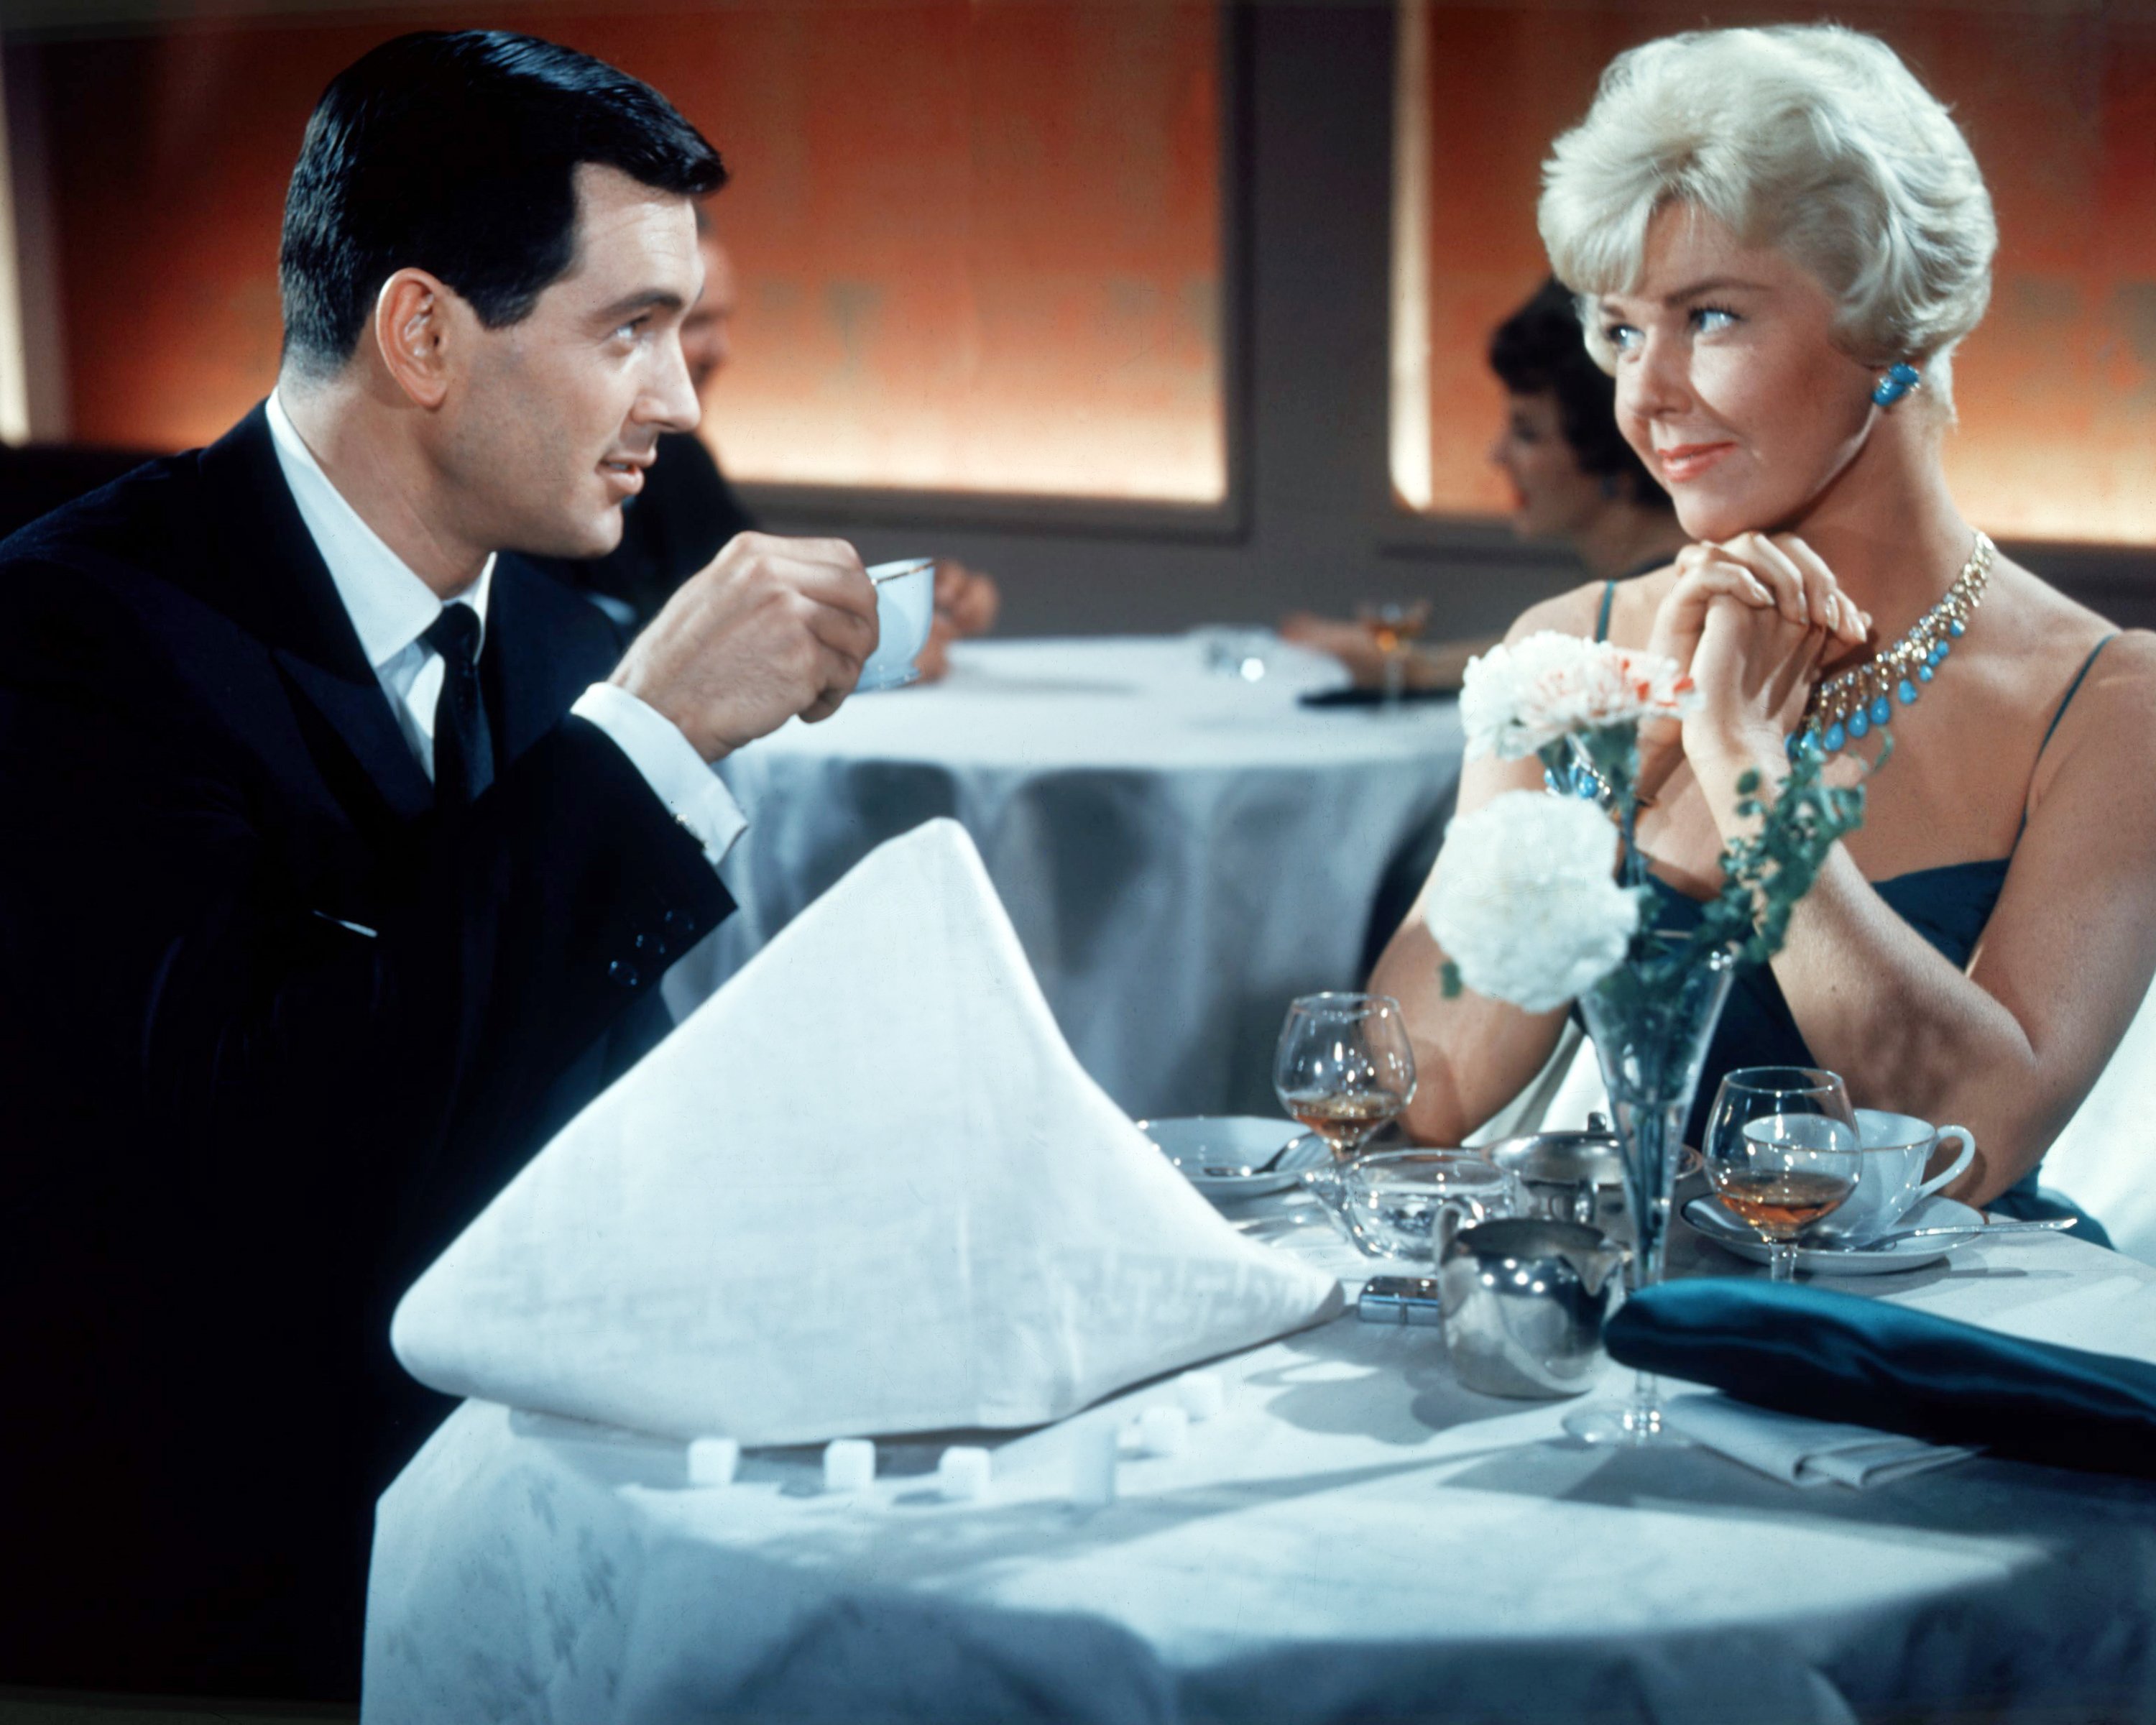 Rock Hudson and Doris Day on the set of "Pillow Talk" in 1959 | Source: Getty Images